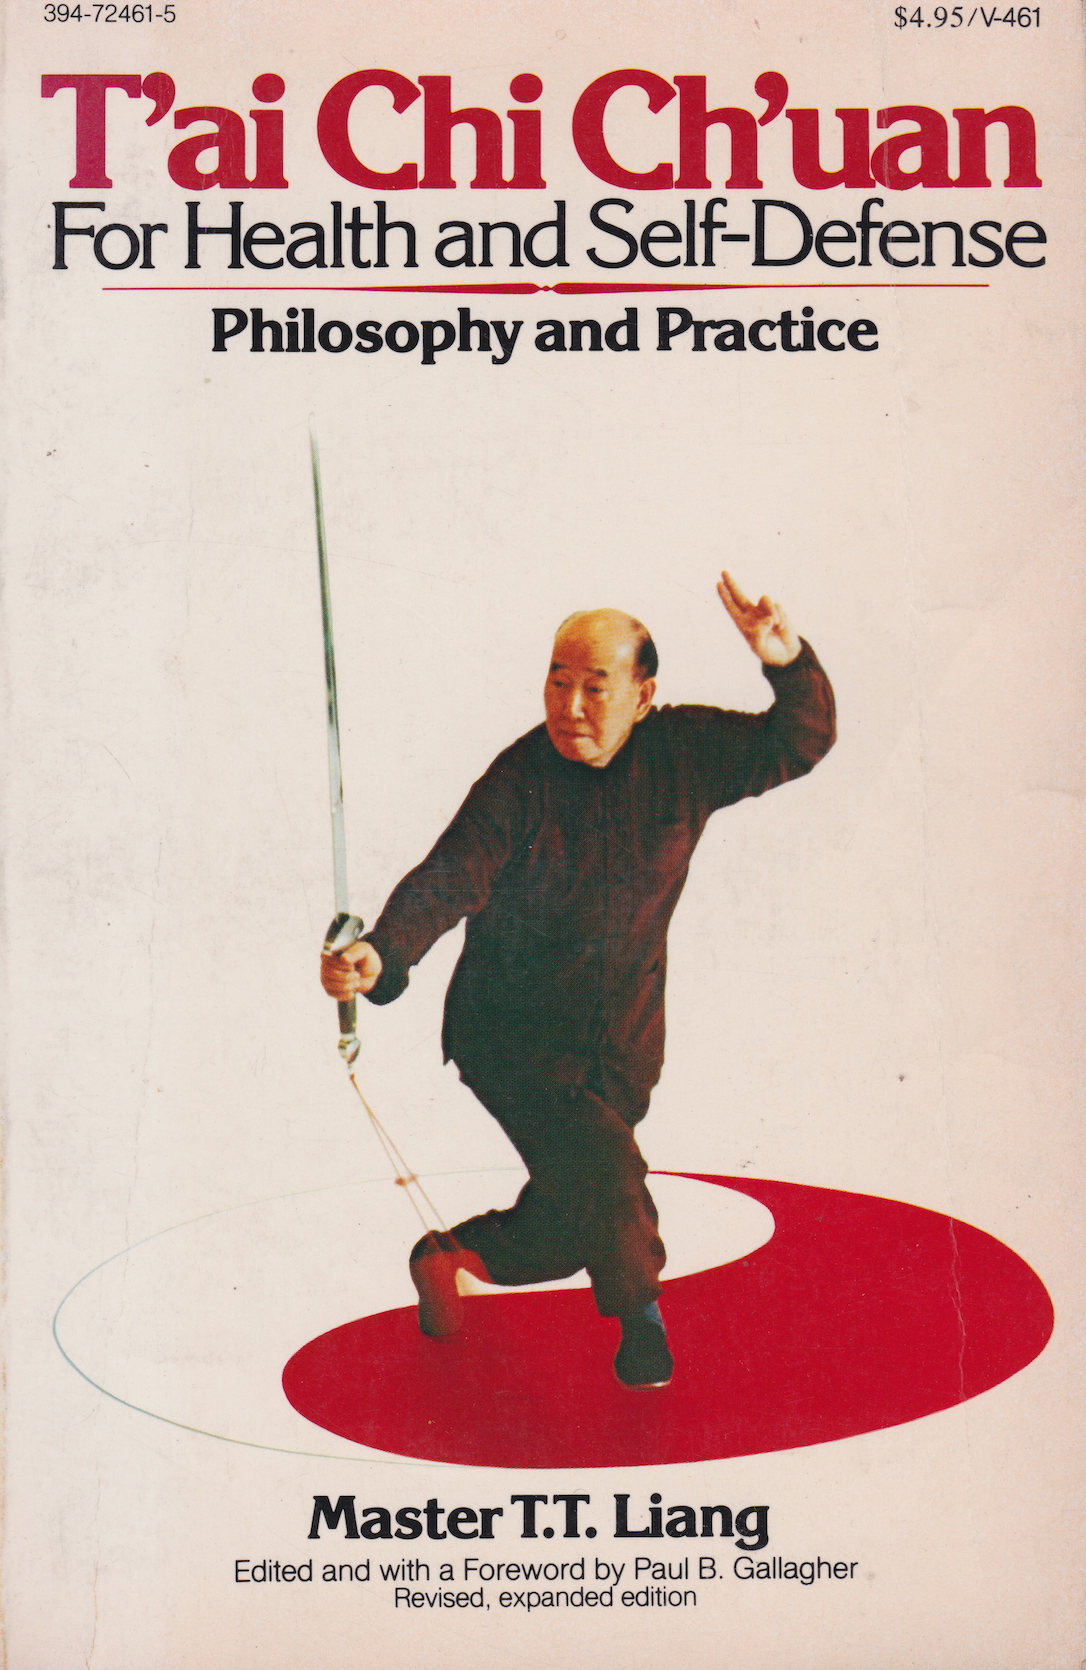 Tai Chi Chuan for Health & Self Defense: Philosophy & Practice Book by T.T. Liang (Preowned) - Budovideos Inc